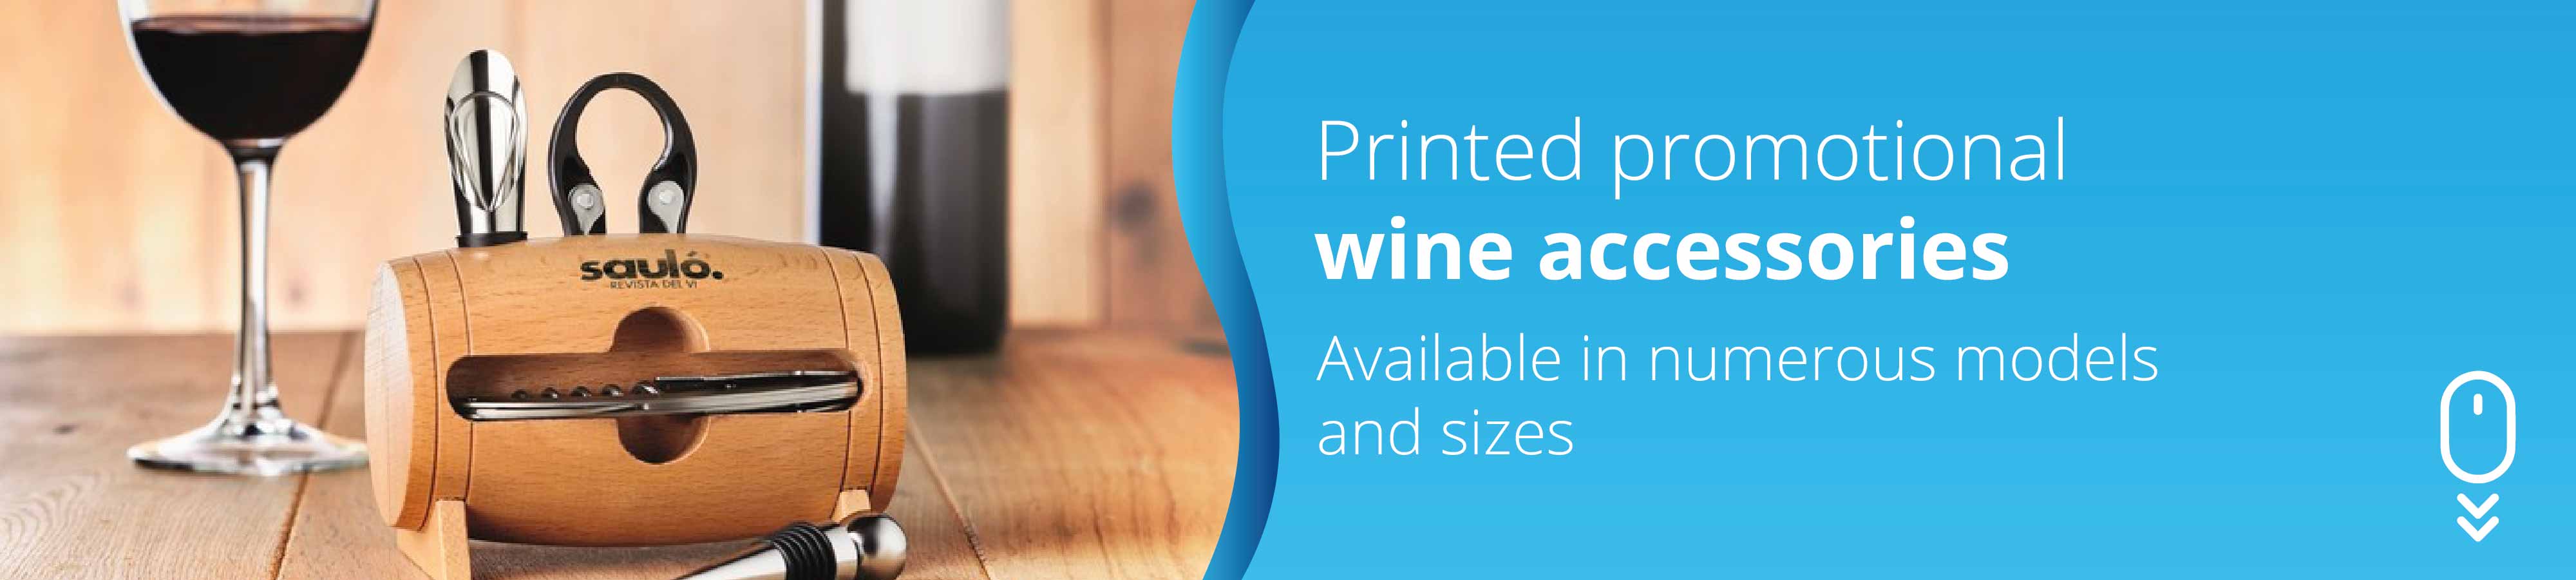 printed-promotional-wine-accessories